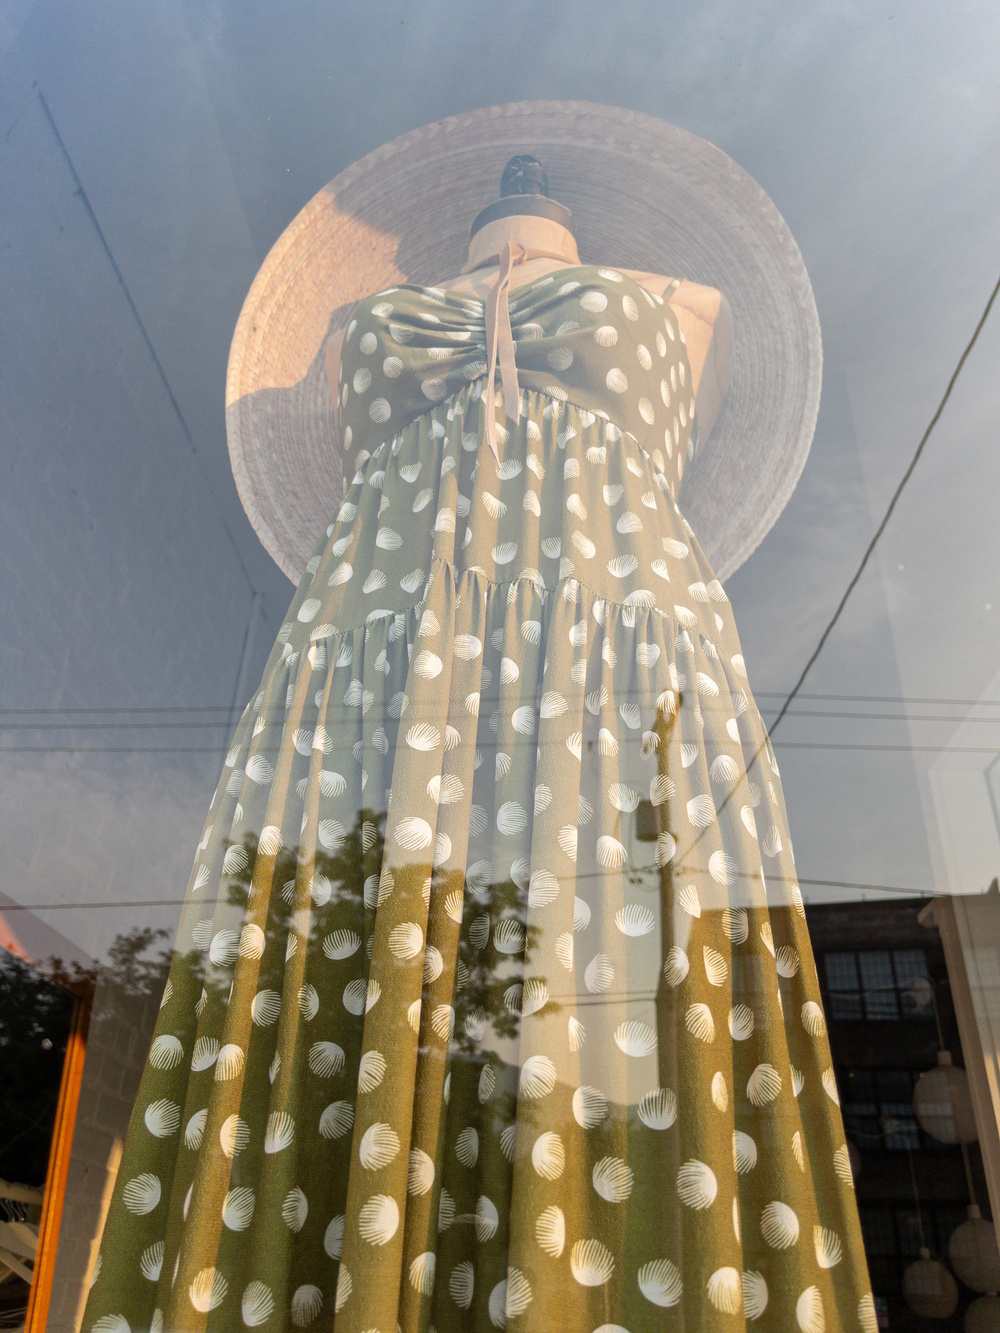 Woman’s sundress, green/brown with beige circular graphic flowers, gathered at the hips and again at the bust, with broad brimmed woven hat on a mannequin. Shot looking up the length of the dress with sky and building reflection on the shop window overlaid.